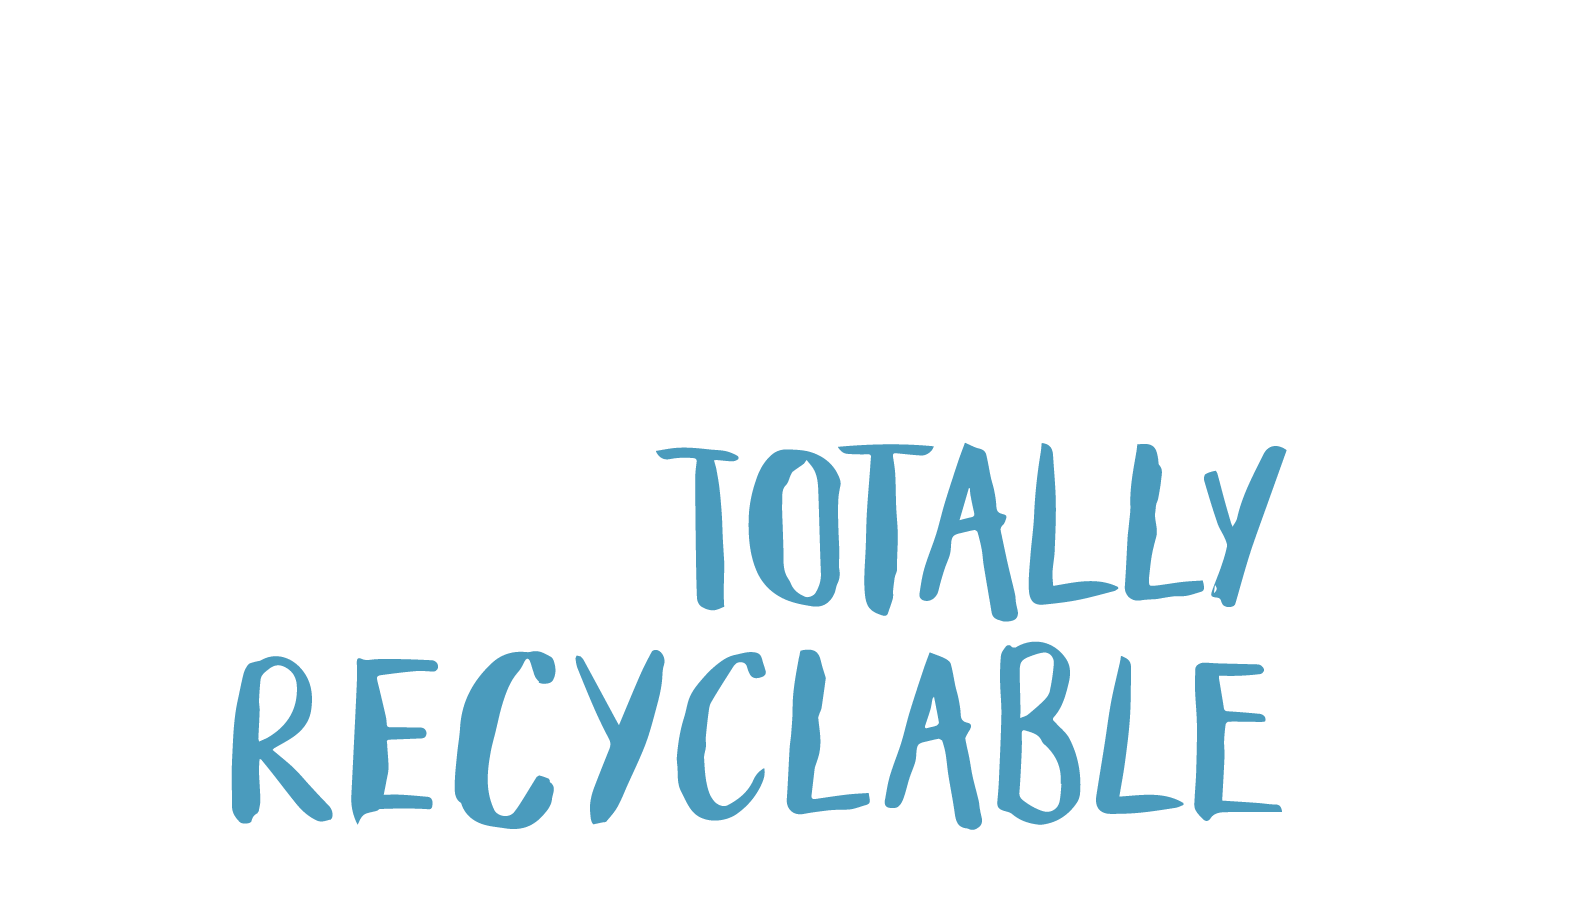 We're ZERO to landfill and totally recyclable